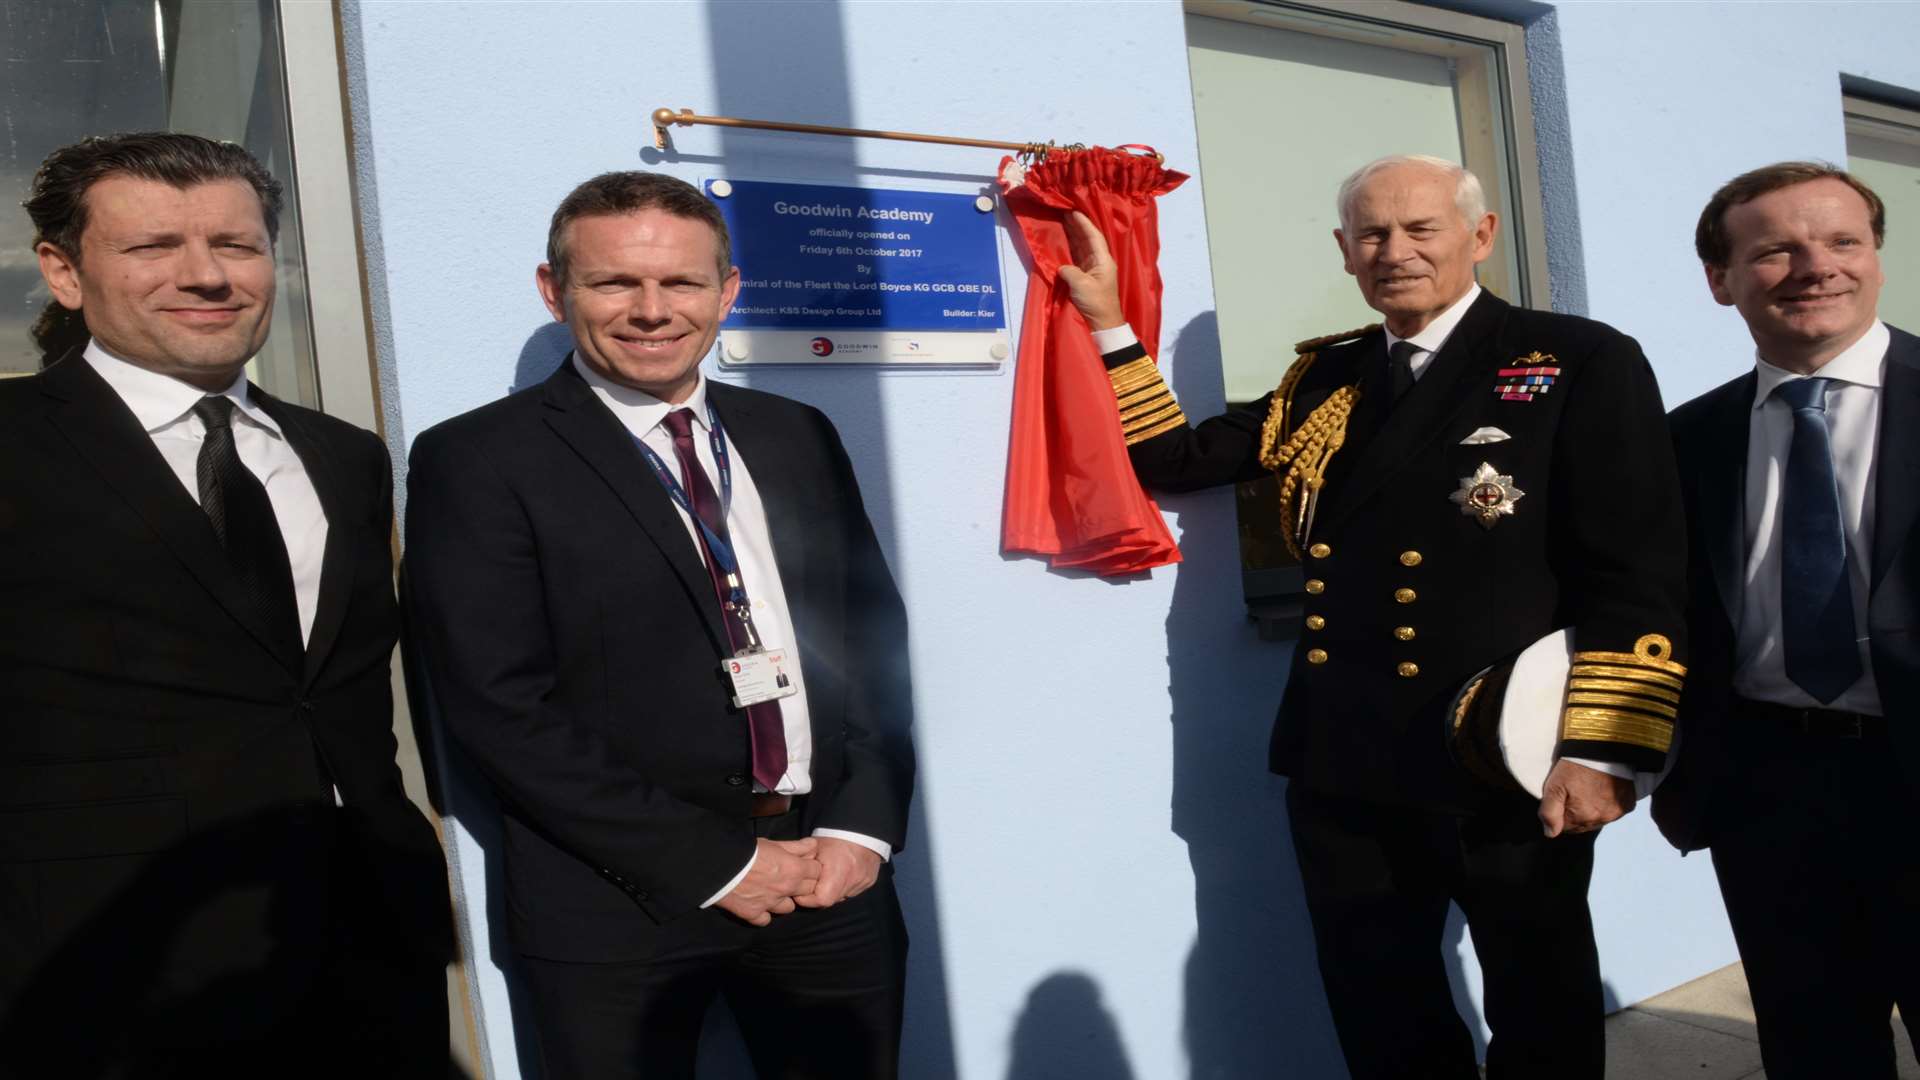 Former chief executive Ellias Achilleos, principal Simon Smith, Admiral The Lord Boyce and MP Charlie Elphicke at school opening in October 2017.